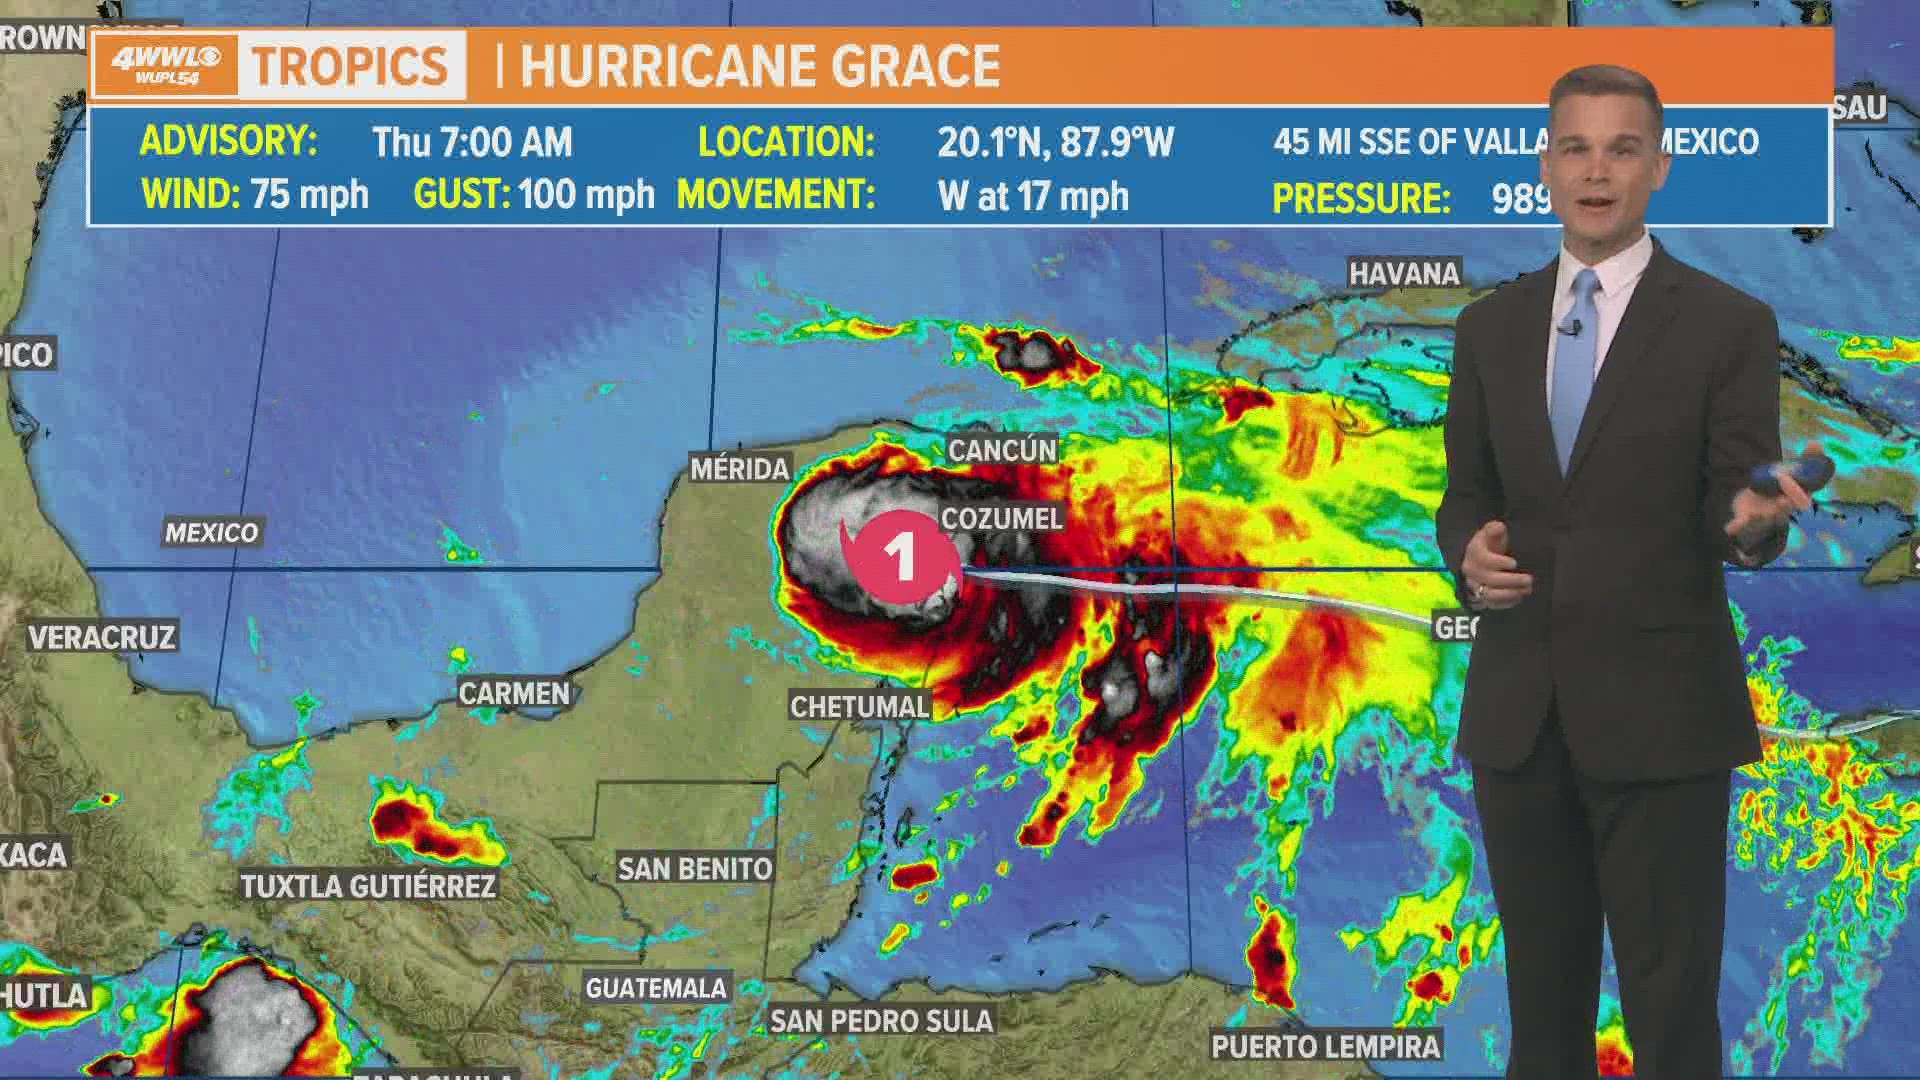 Local Weather Expert Payton Malone has the latest information on Hurricane Grace and soon-to-be Hurricane Henri.